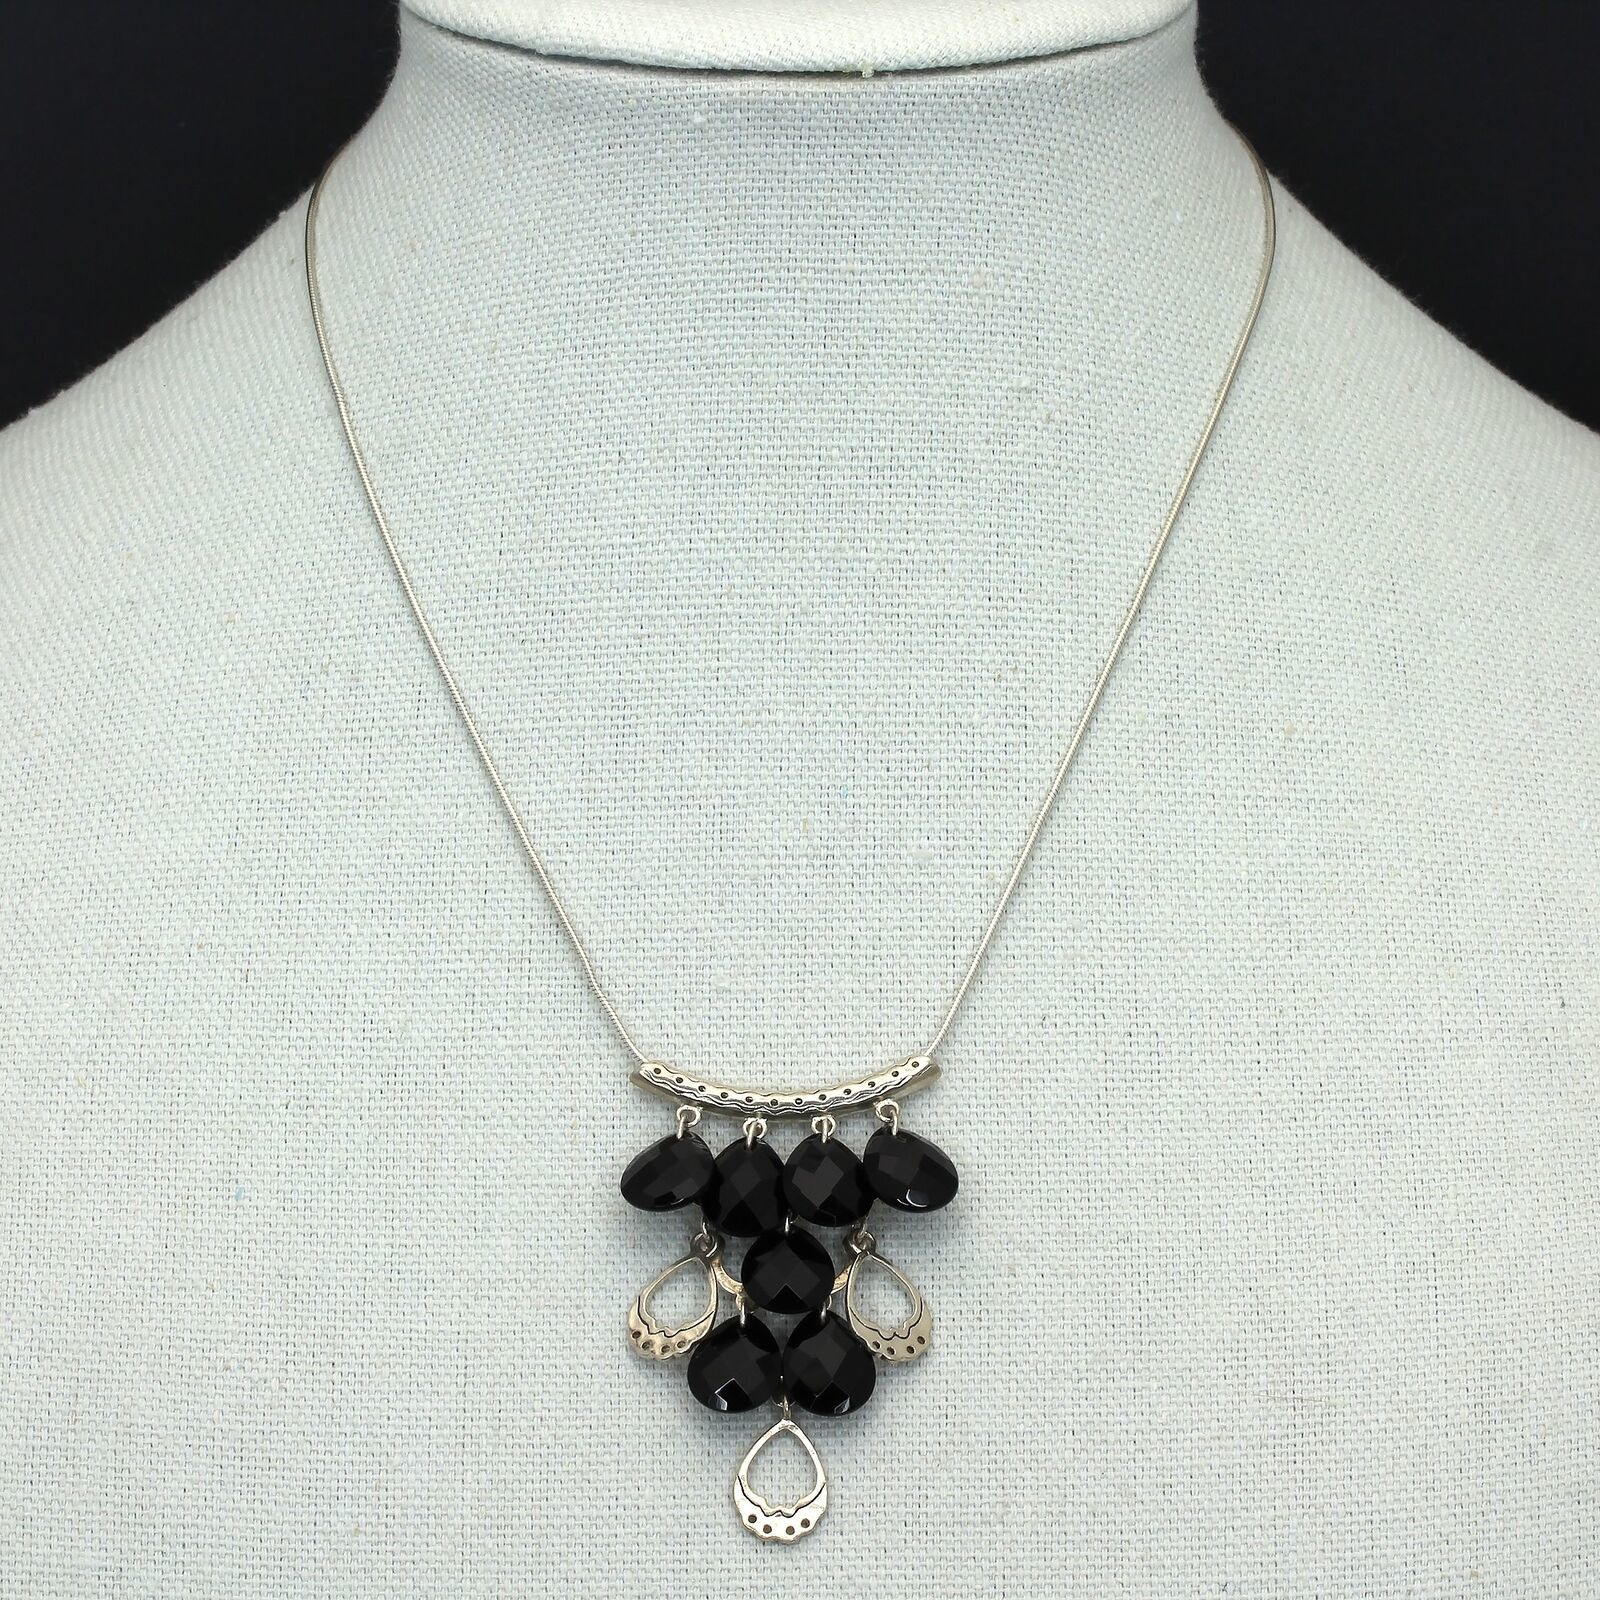 Retired Silpada Sterling Silver Agate Teardrops ALL ON BLACK Necklace N3022 - $49.99